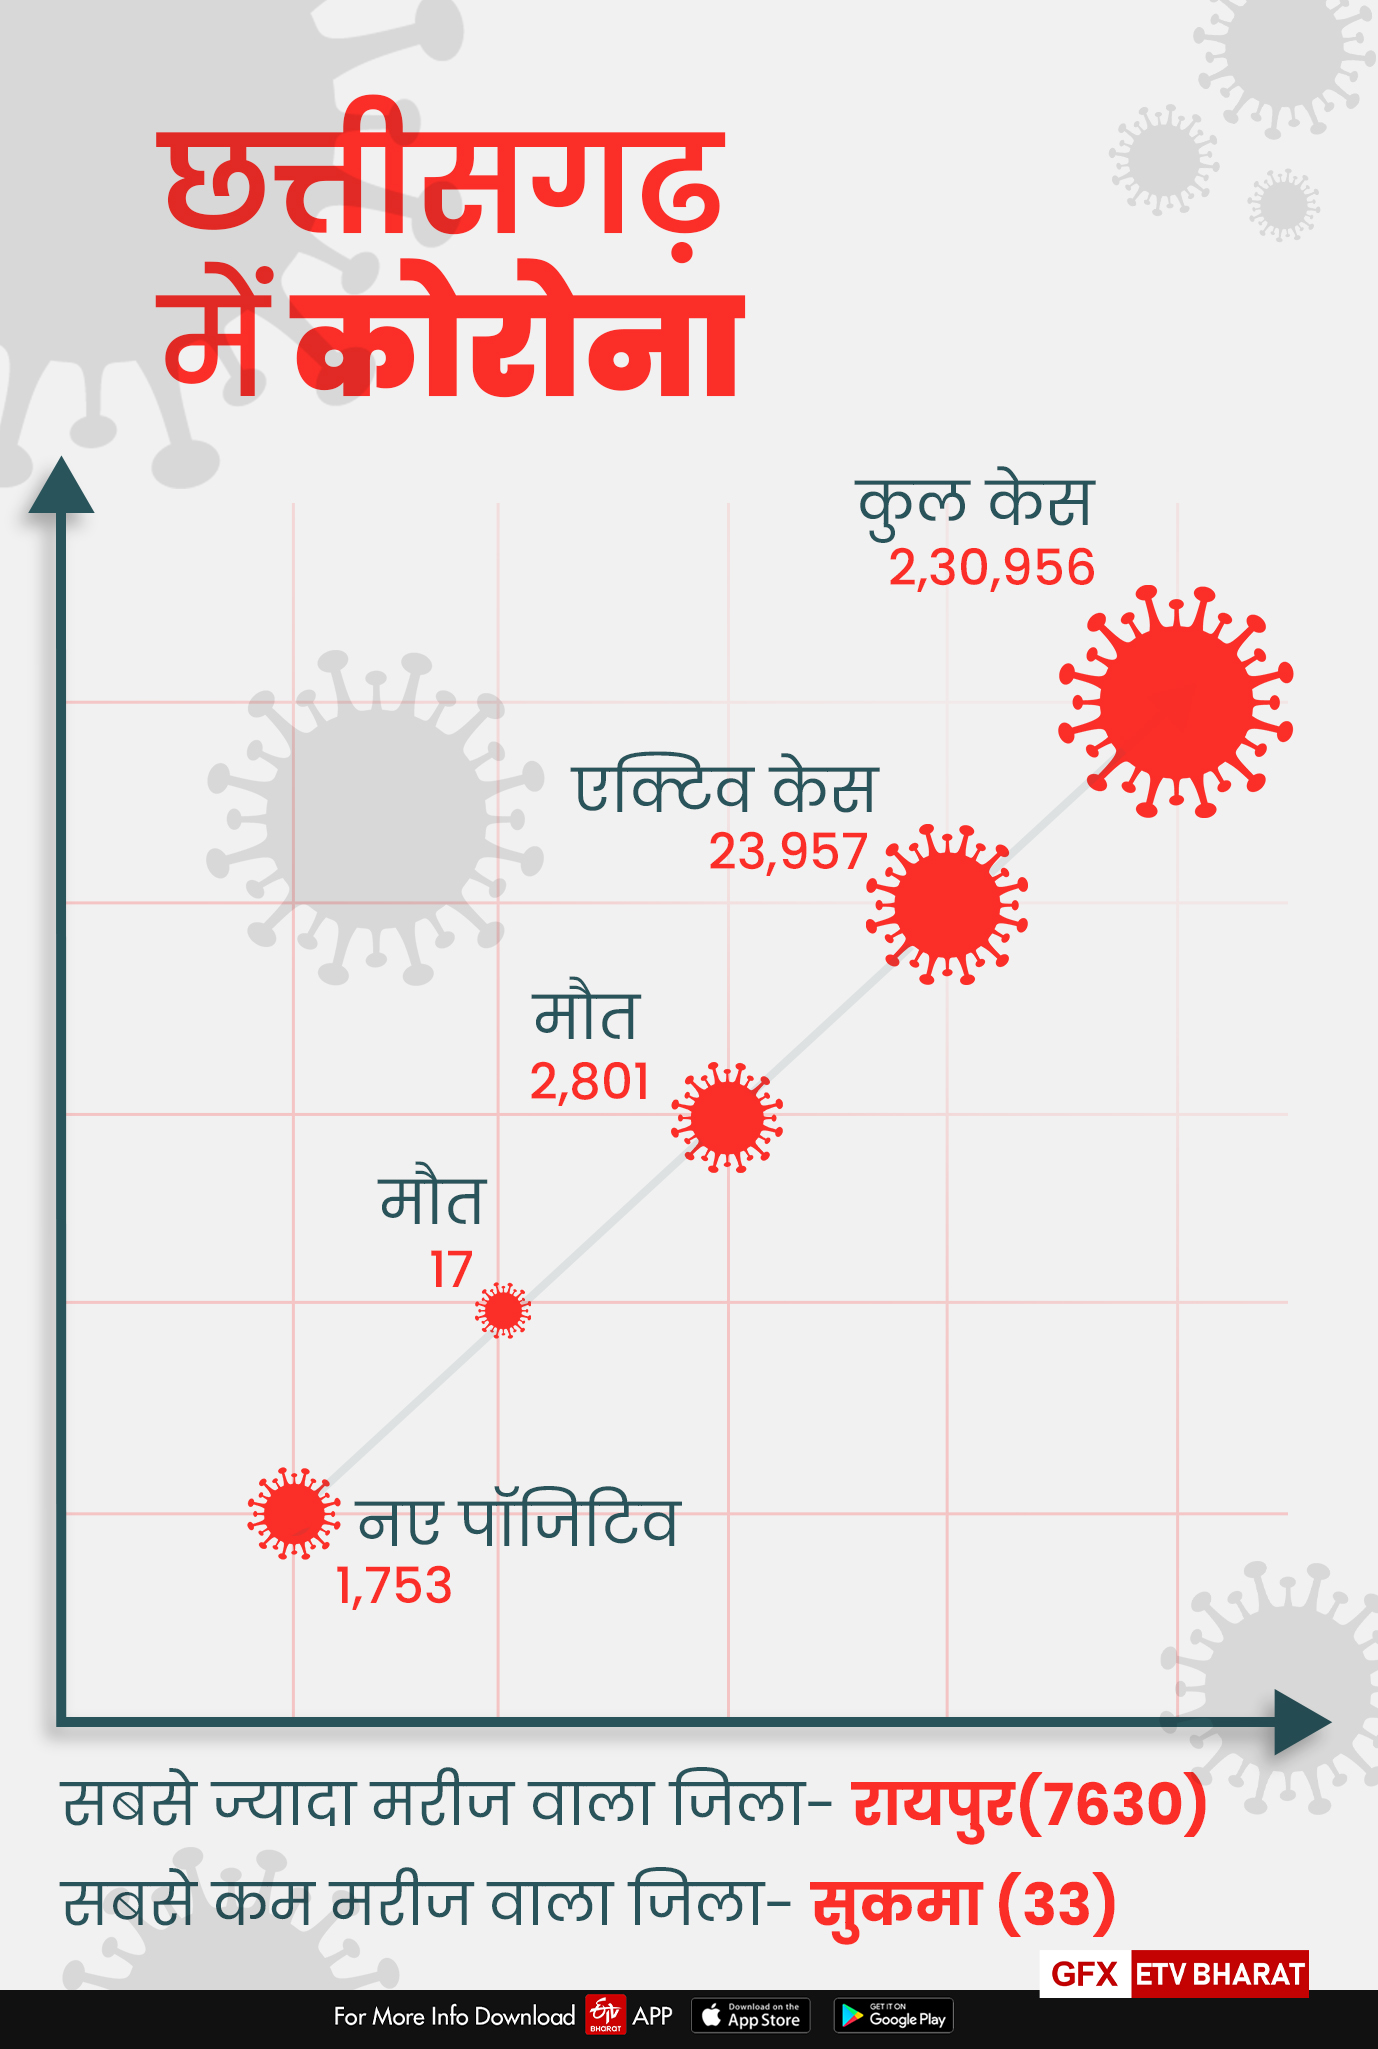 changing weather risk of corona increases in Raigarh